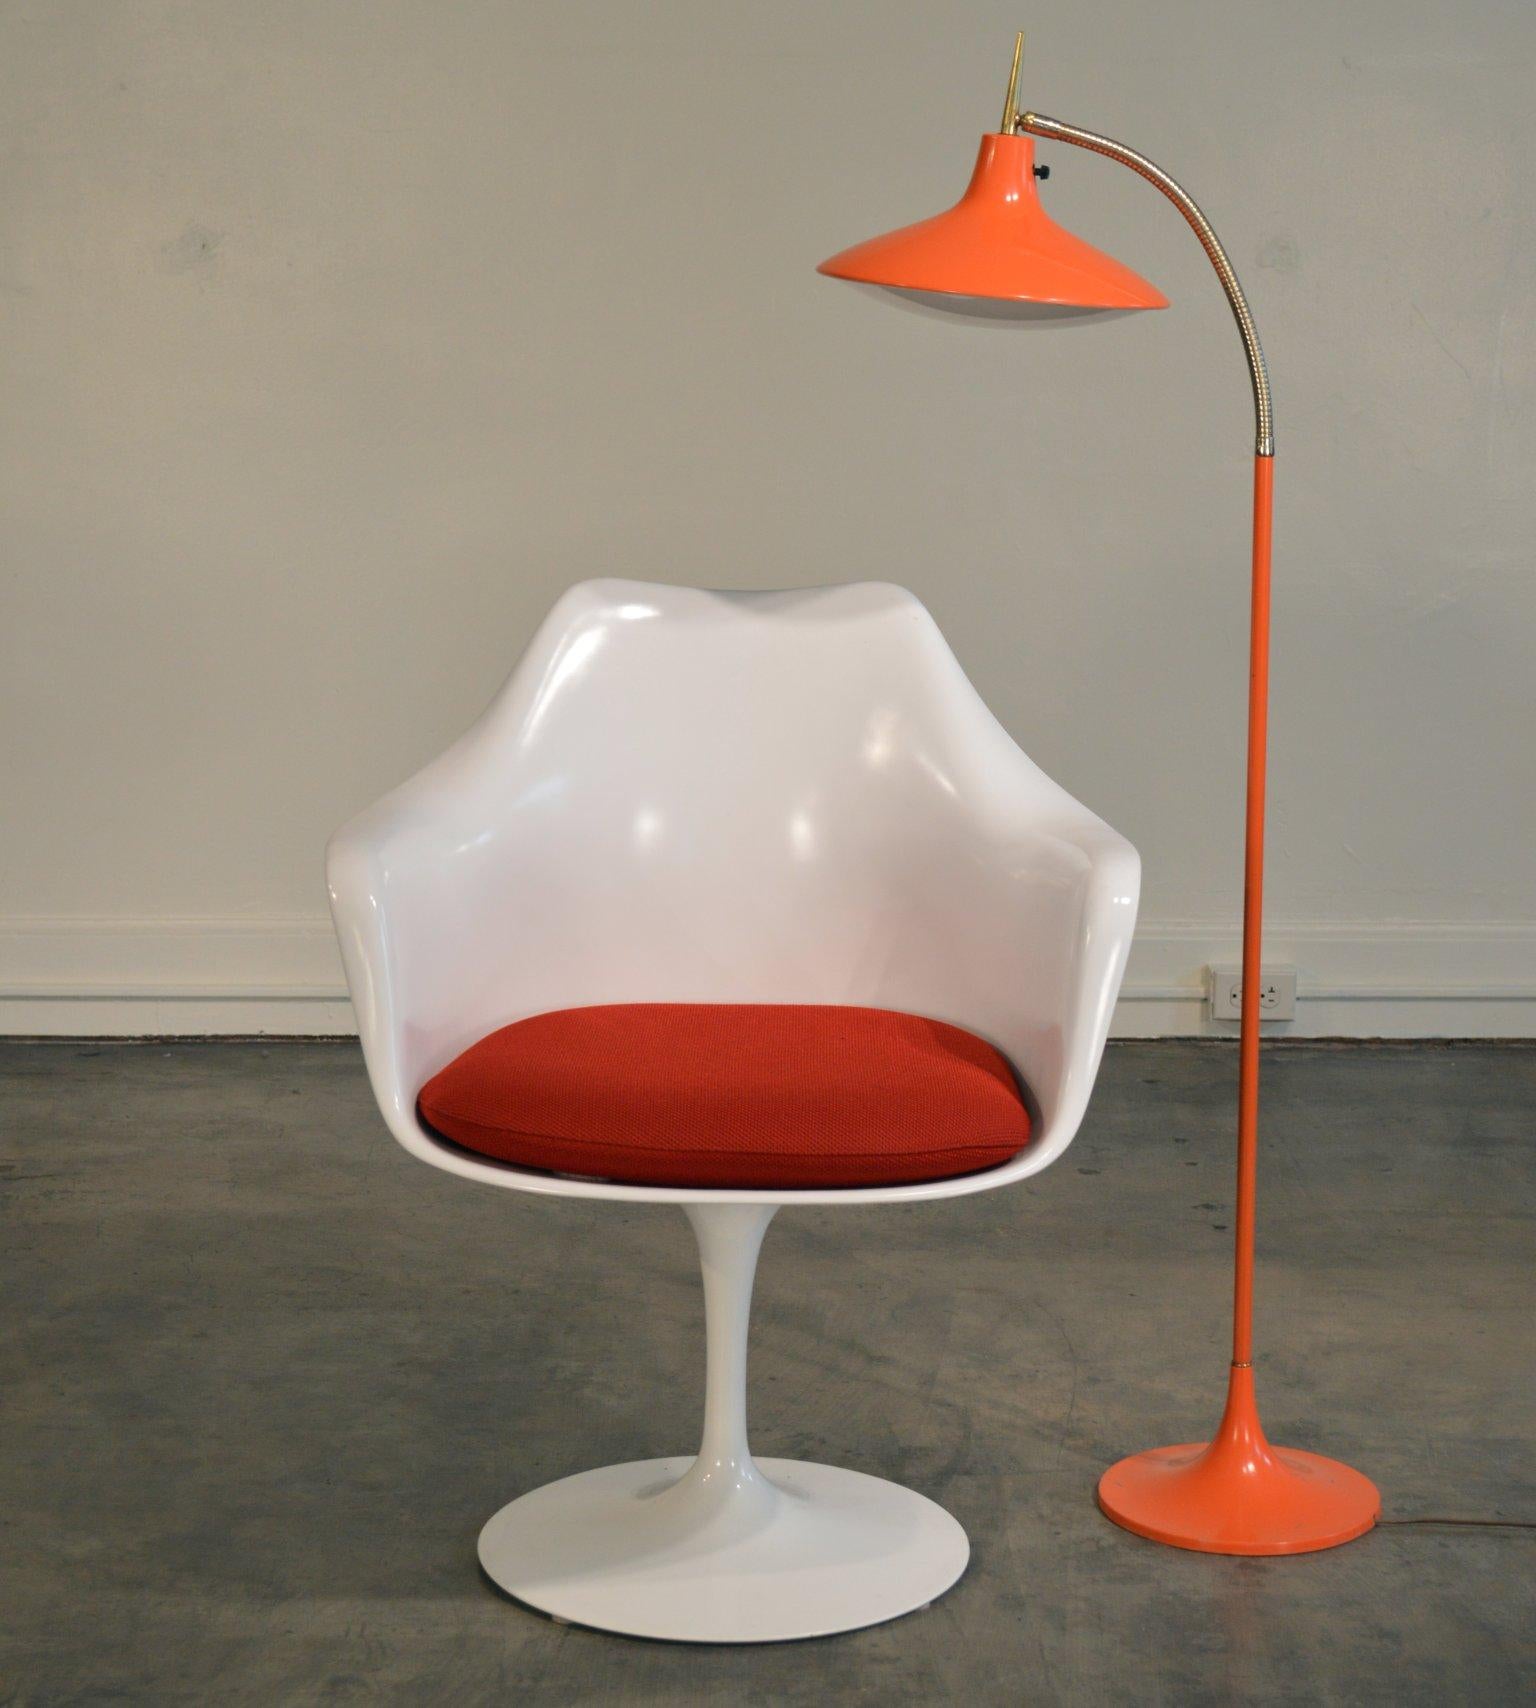 Mid-Century floor lamp designed by Richard Barr and Harold Weiss for the Laurel Lamp Company circa 1960's. Original Tangerine color, model B-683, UFO shaped floor lamp on articulating brass gooseneck with tulip-shaped orange enameled metal base.